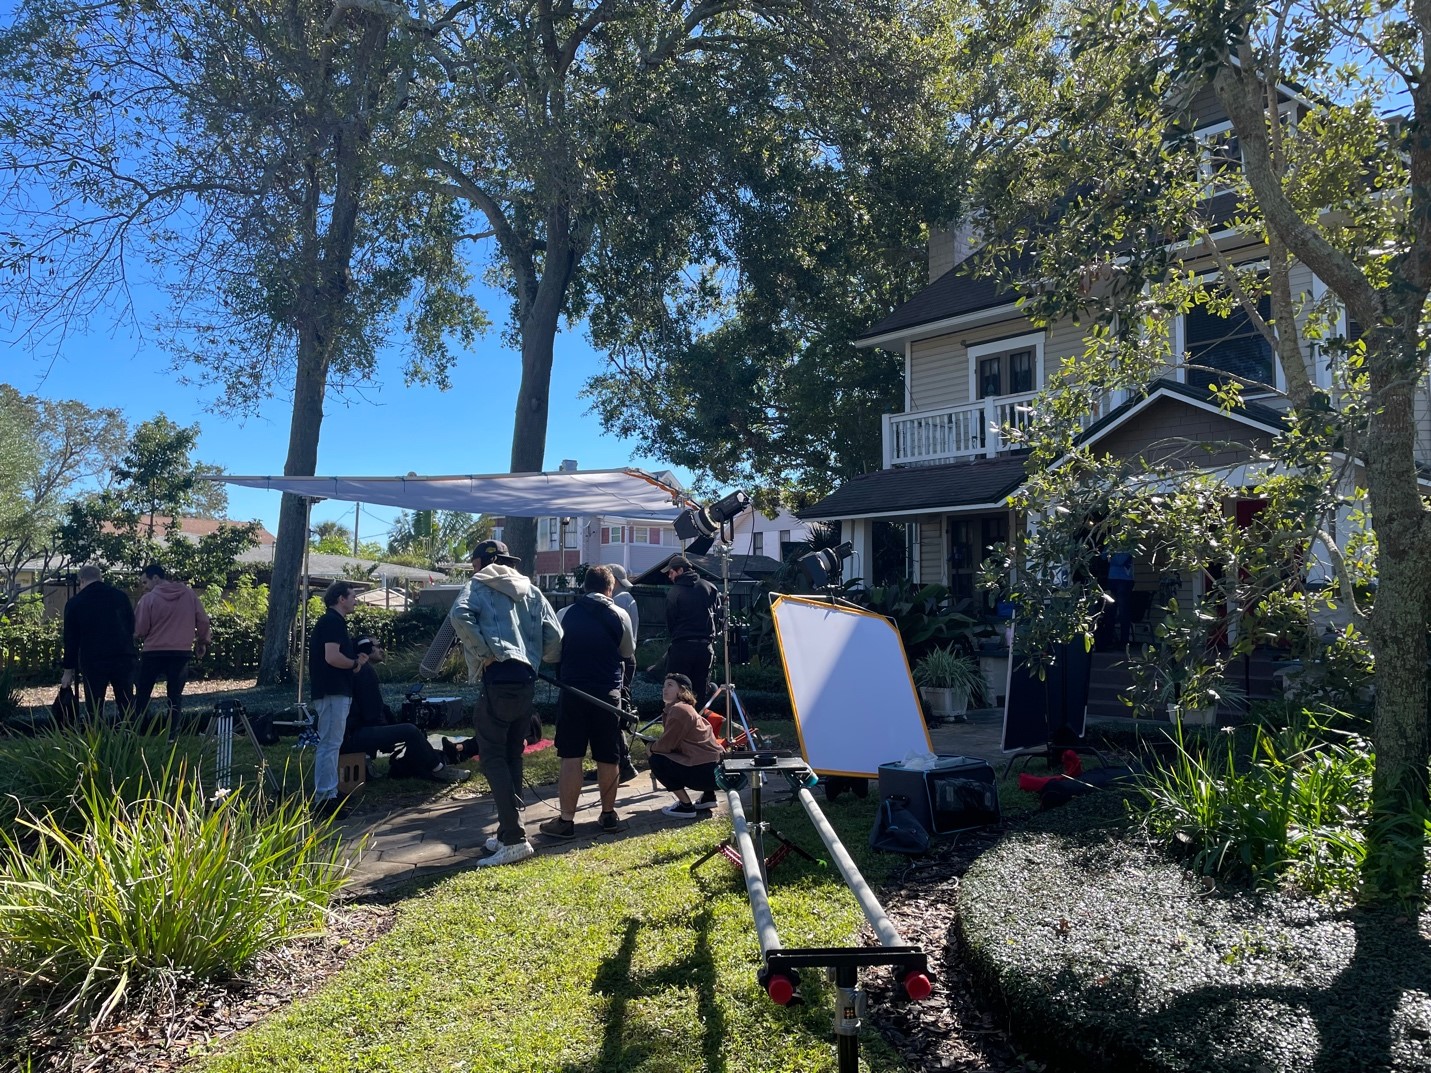 Film Production in Old Southeast Neighborhood